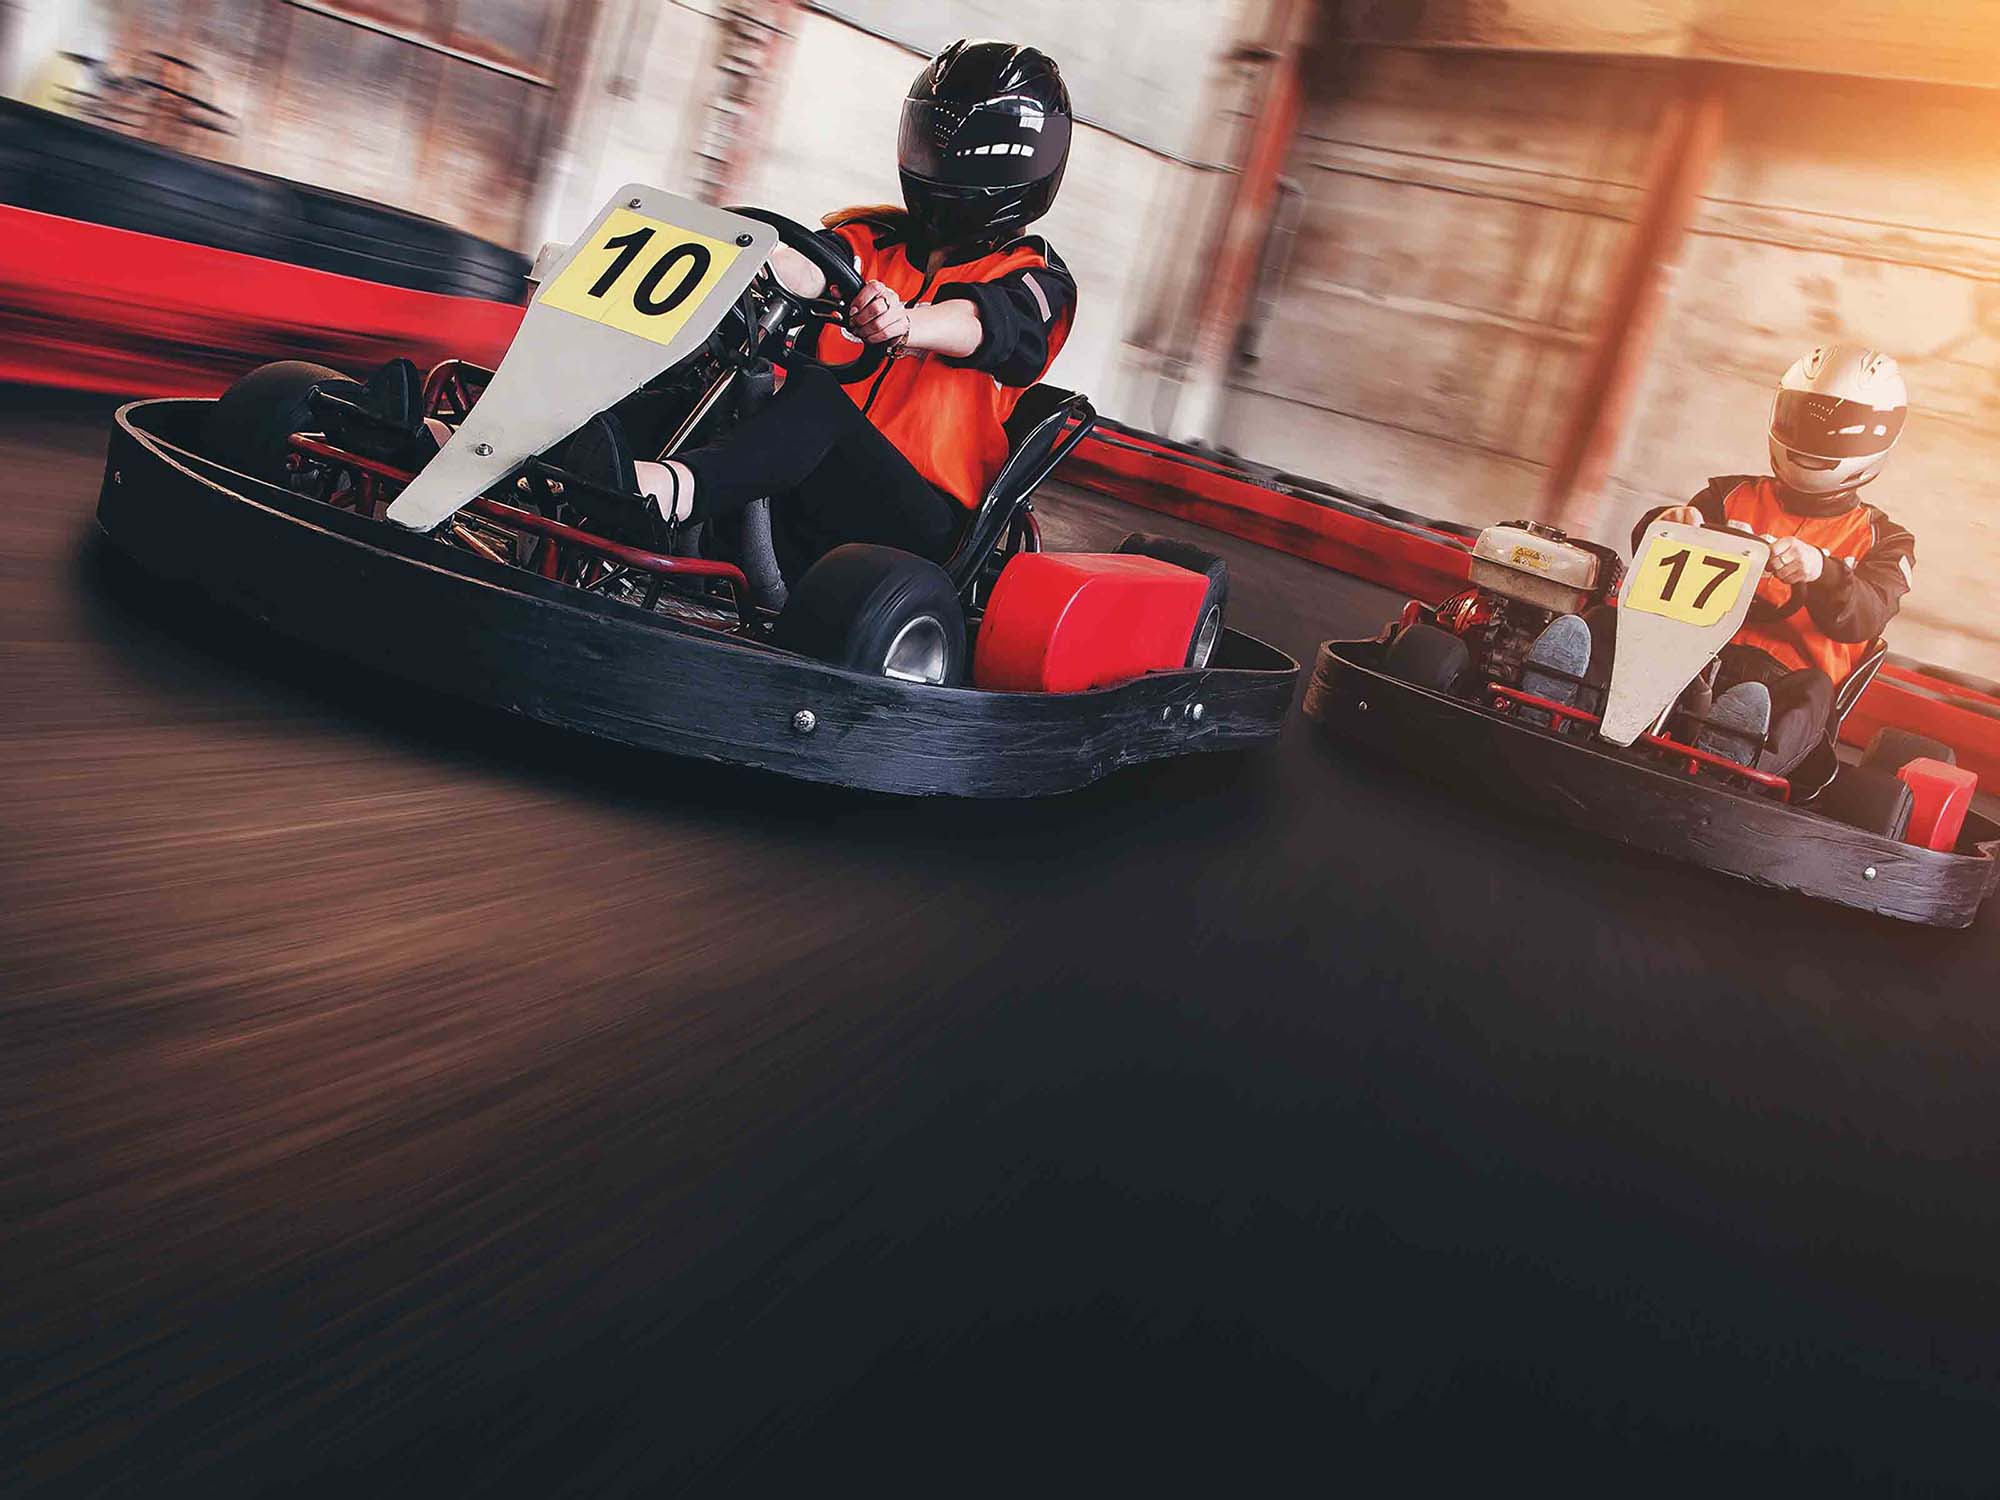 How to Make the Most Out of Fathers Day - Go Karting